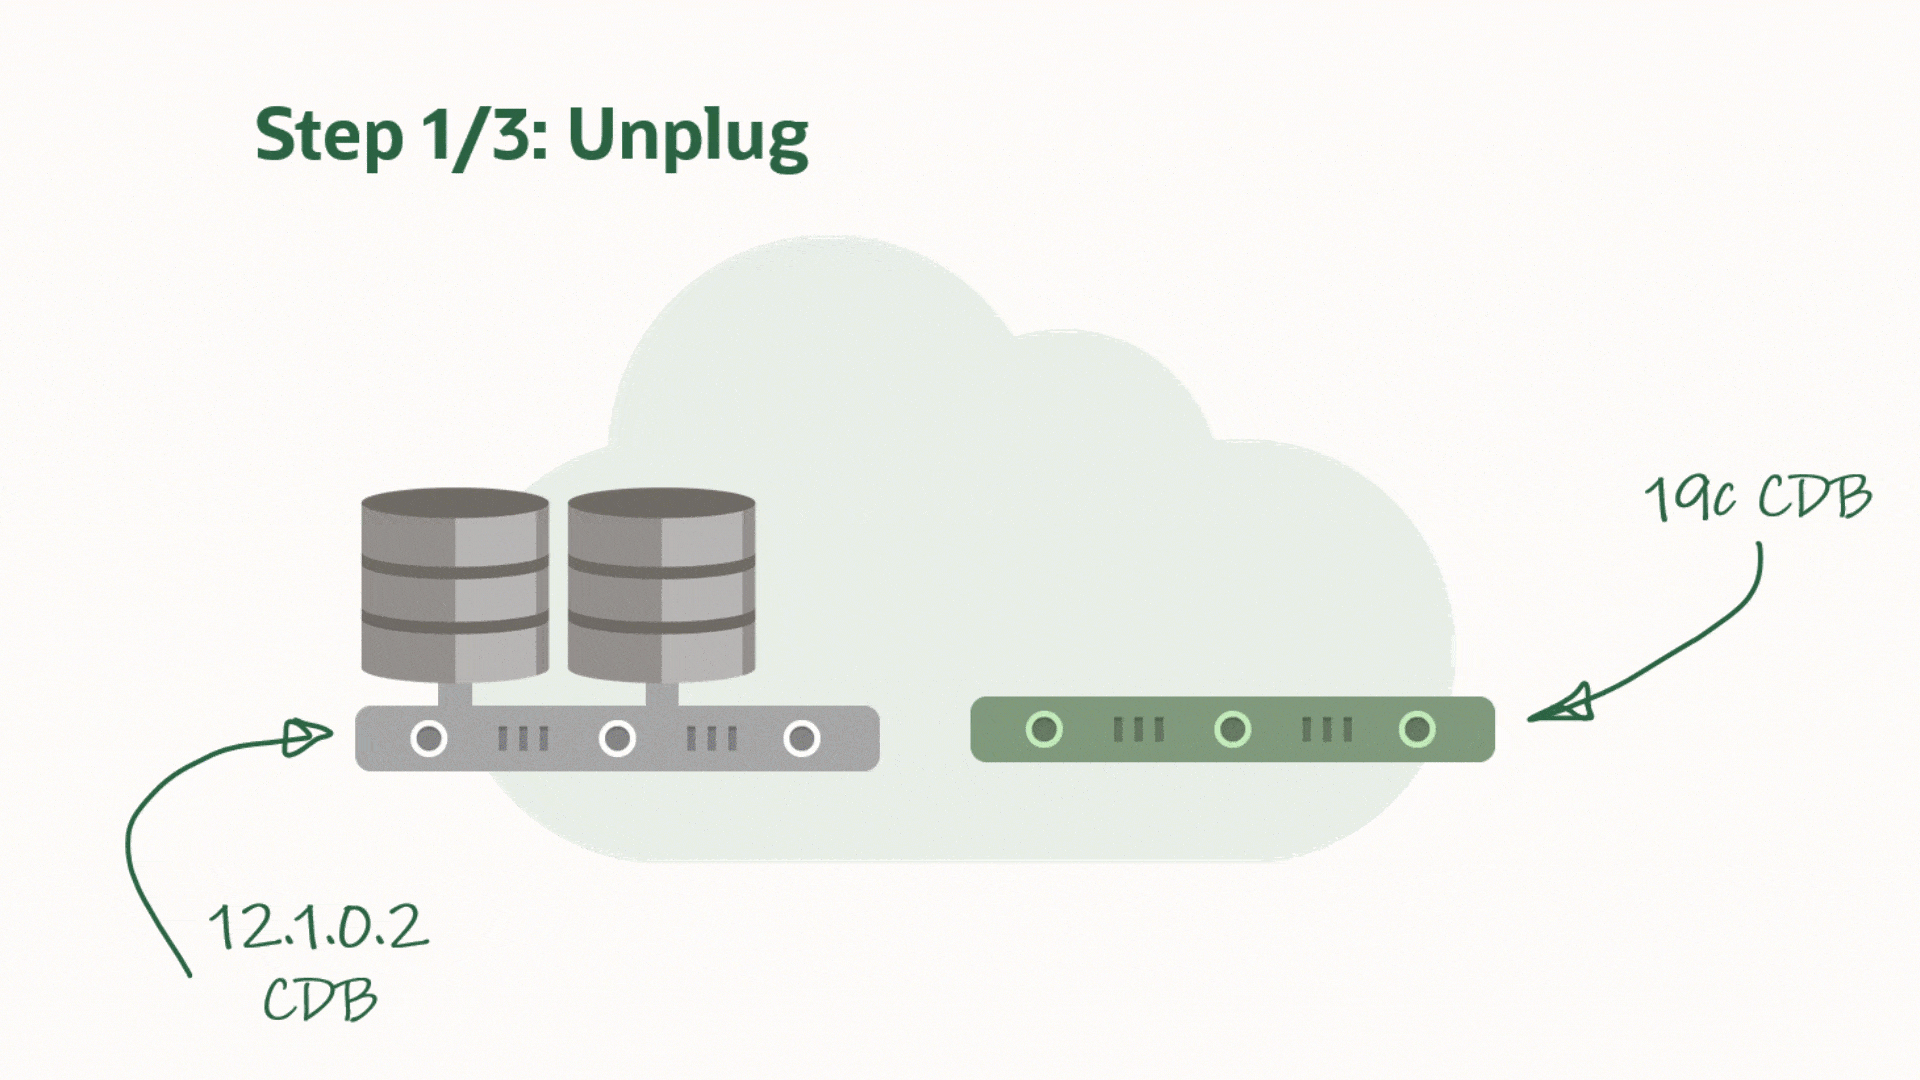 Concept of unplug-plug upgrades which are supported with AutoUpgrade version 21.1.1